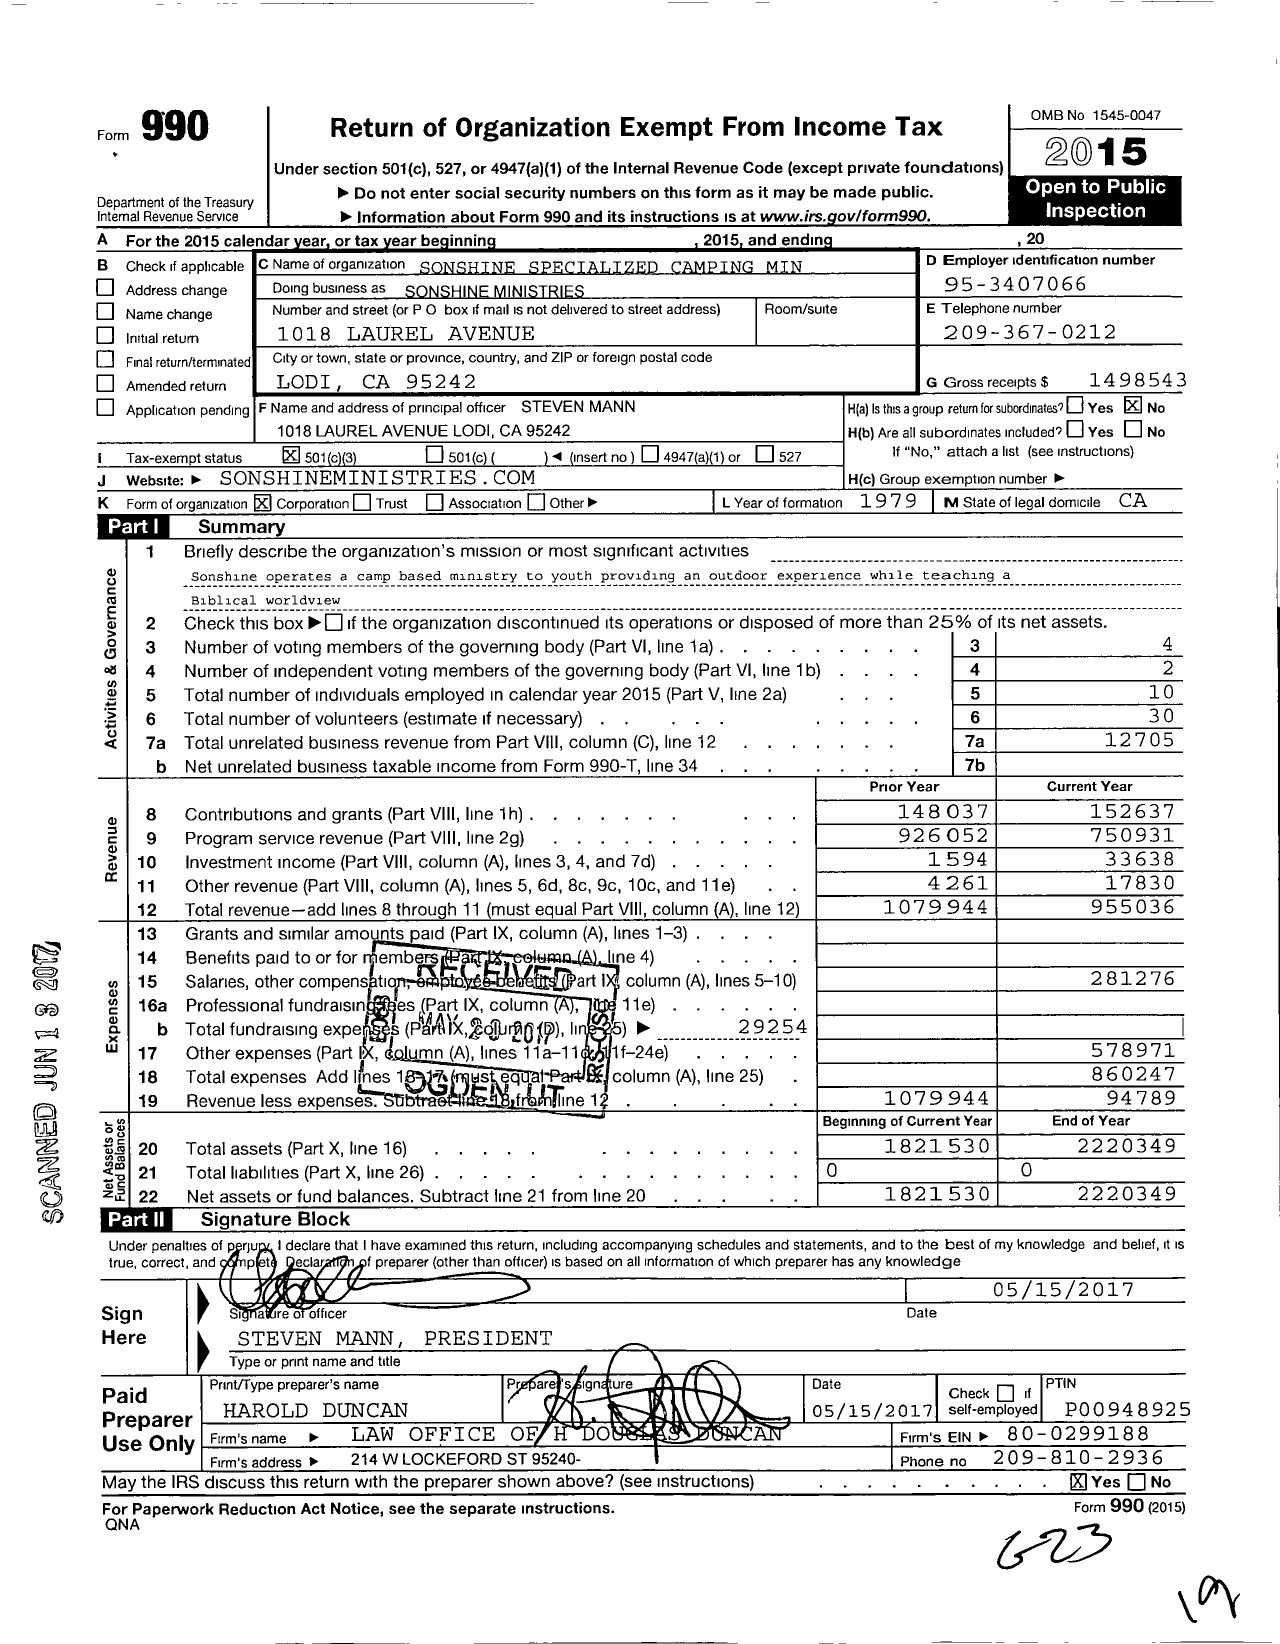 Image of first page of 2015 Form 990 for Sonshine Ministries / Sonshine Specialized Camping Min